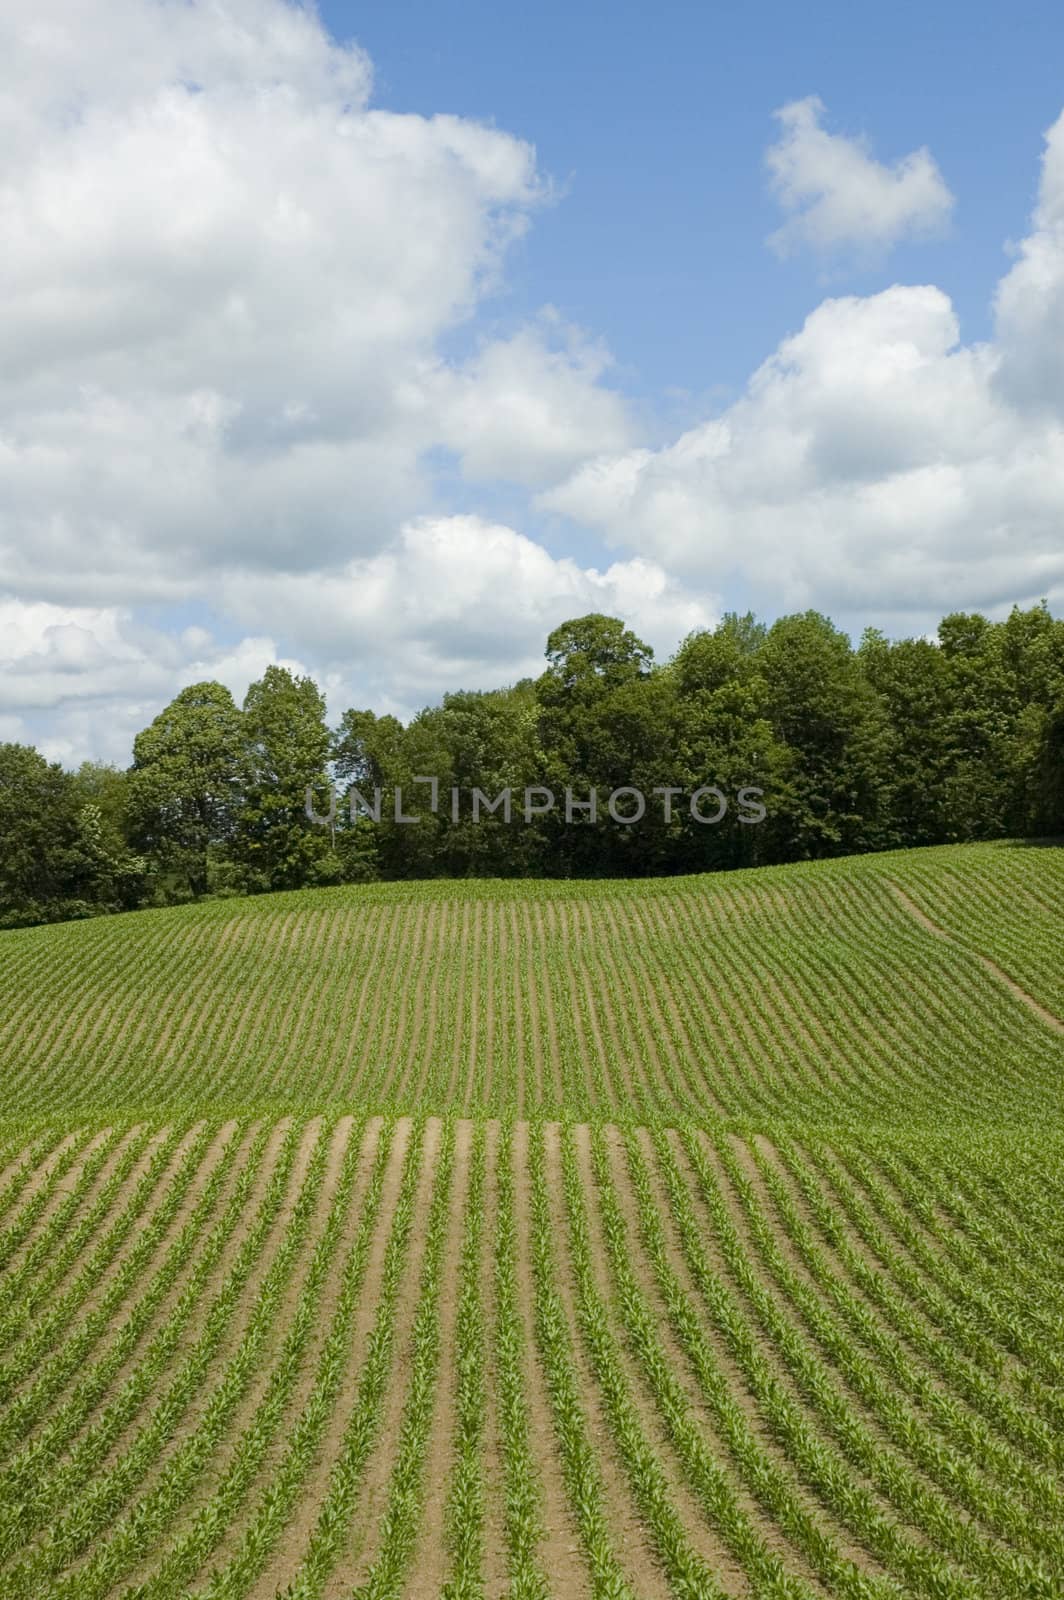 Vertical photo of corn field - graphic, texture, blue sky with clouds